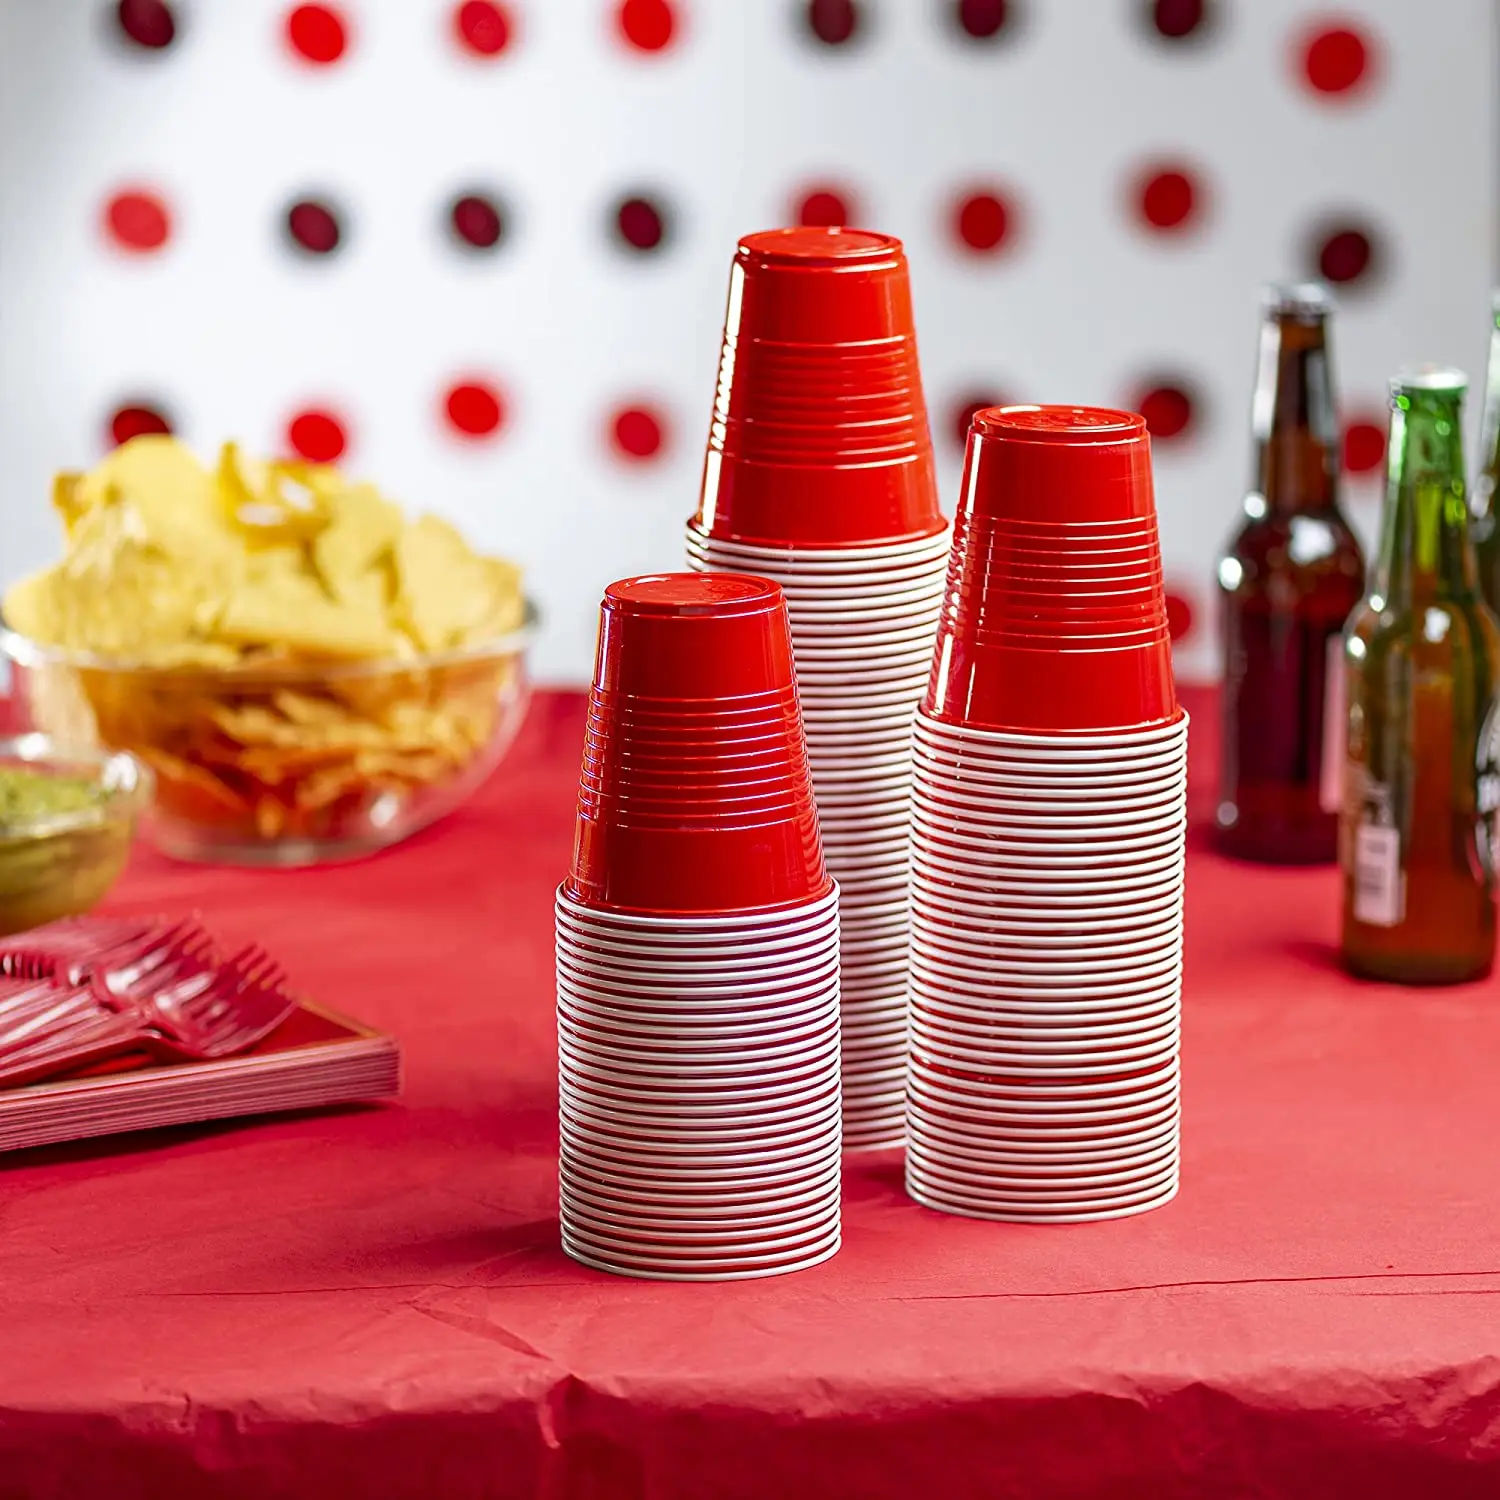 https://ae01.alicdn.com/kf/S6d4df9c81a0d4e01b97a0e4e8277b817w/25pcs-Red-Drinking-Cups-Party-Cup-Disposable-Cup-Disposable-Party-Plastic-Cups-Big-Birthday-Party-Cups.jpg